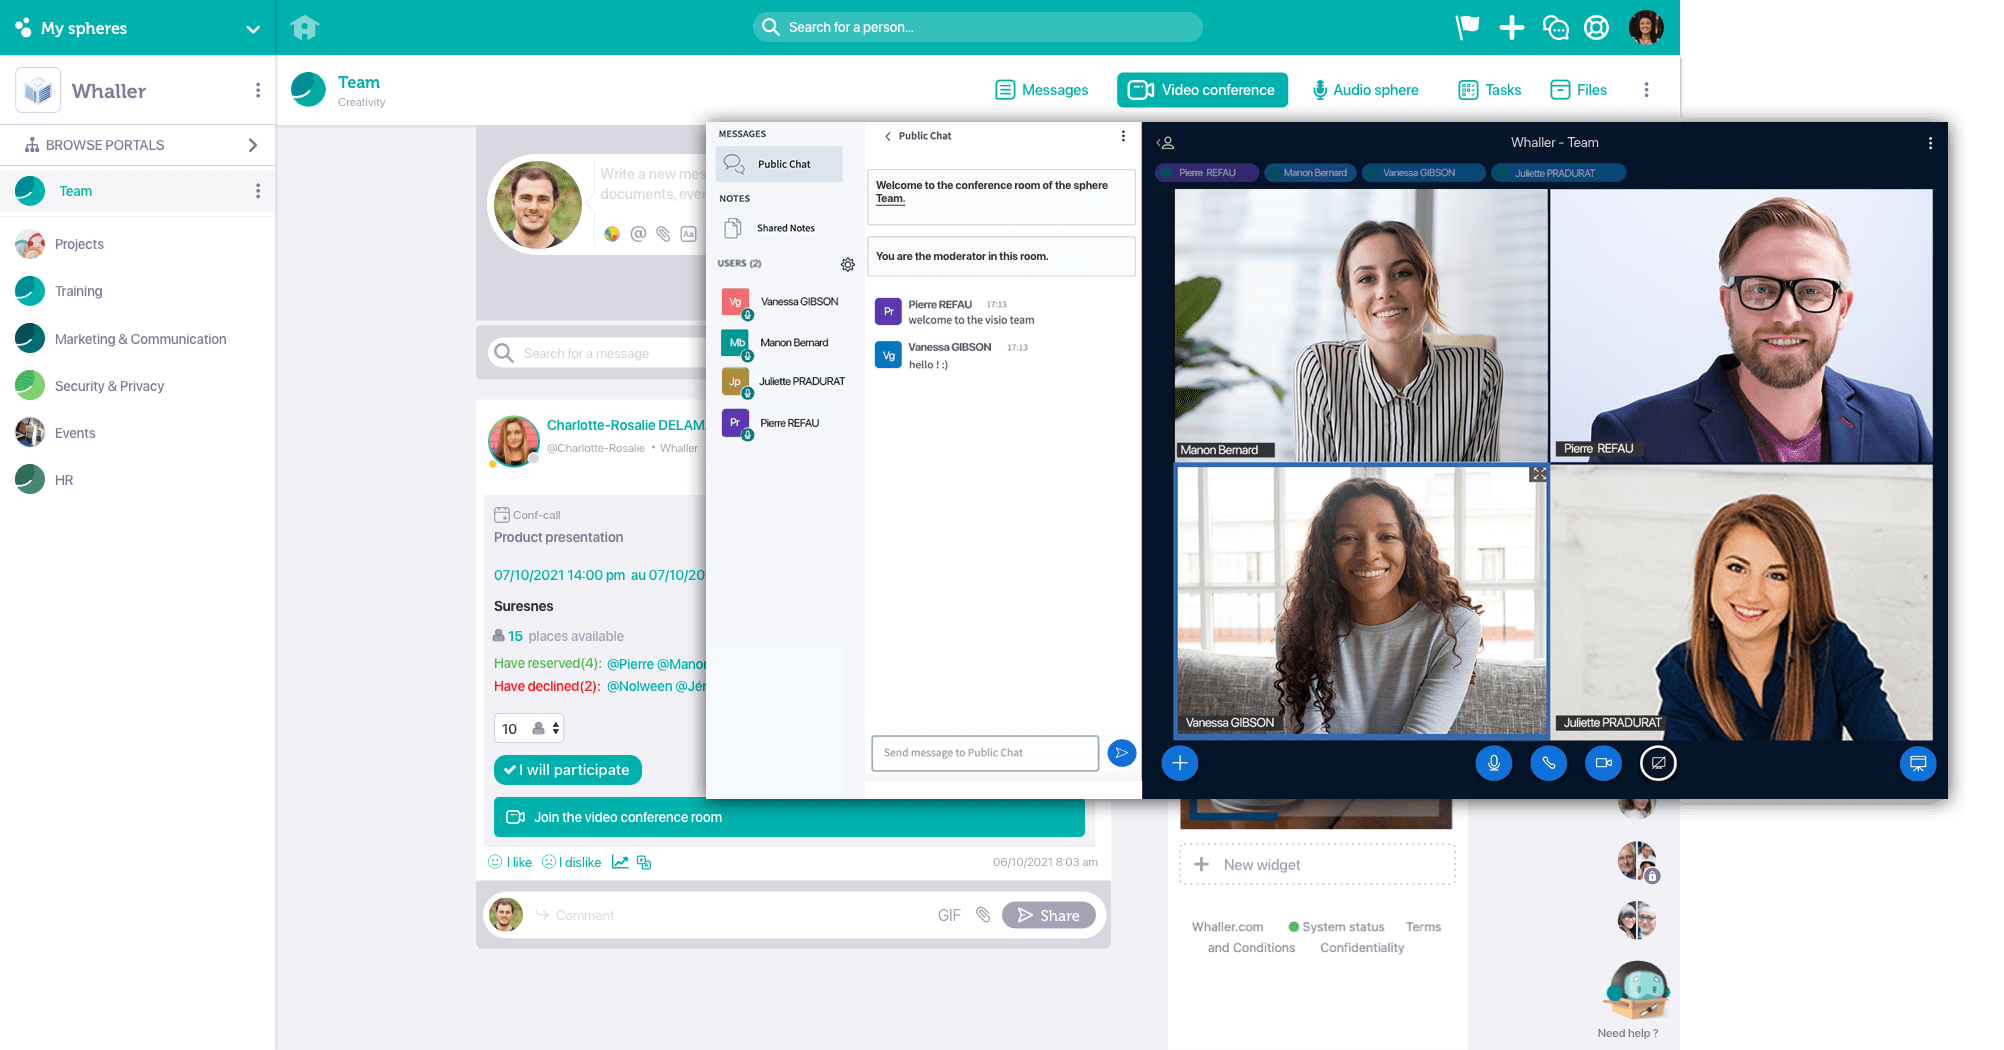 Whaller - The Whaller platform offers one click access to a variety of video conferencing solutions including BigBlueButton, Glowbl, Jitsi Meet and Whereby.